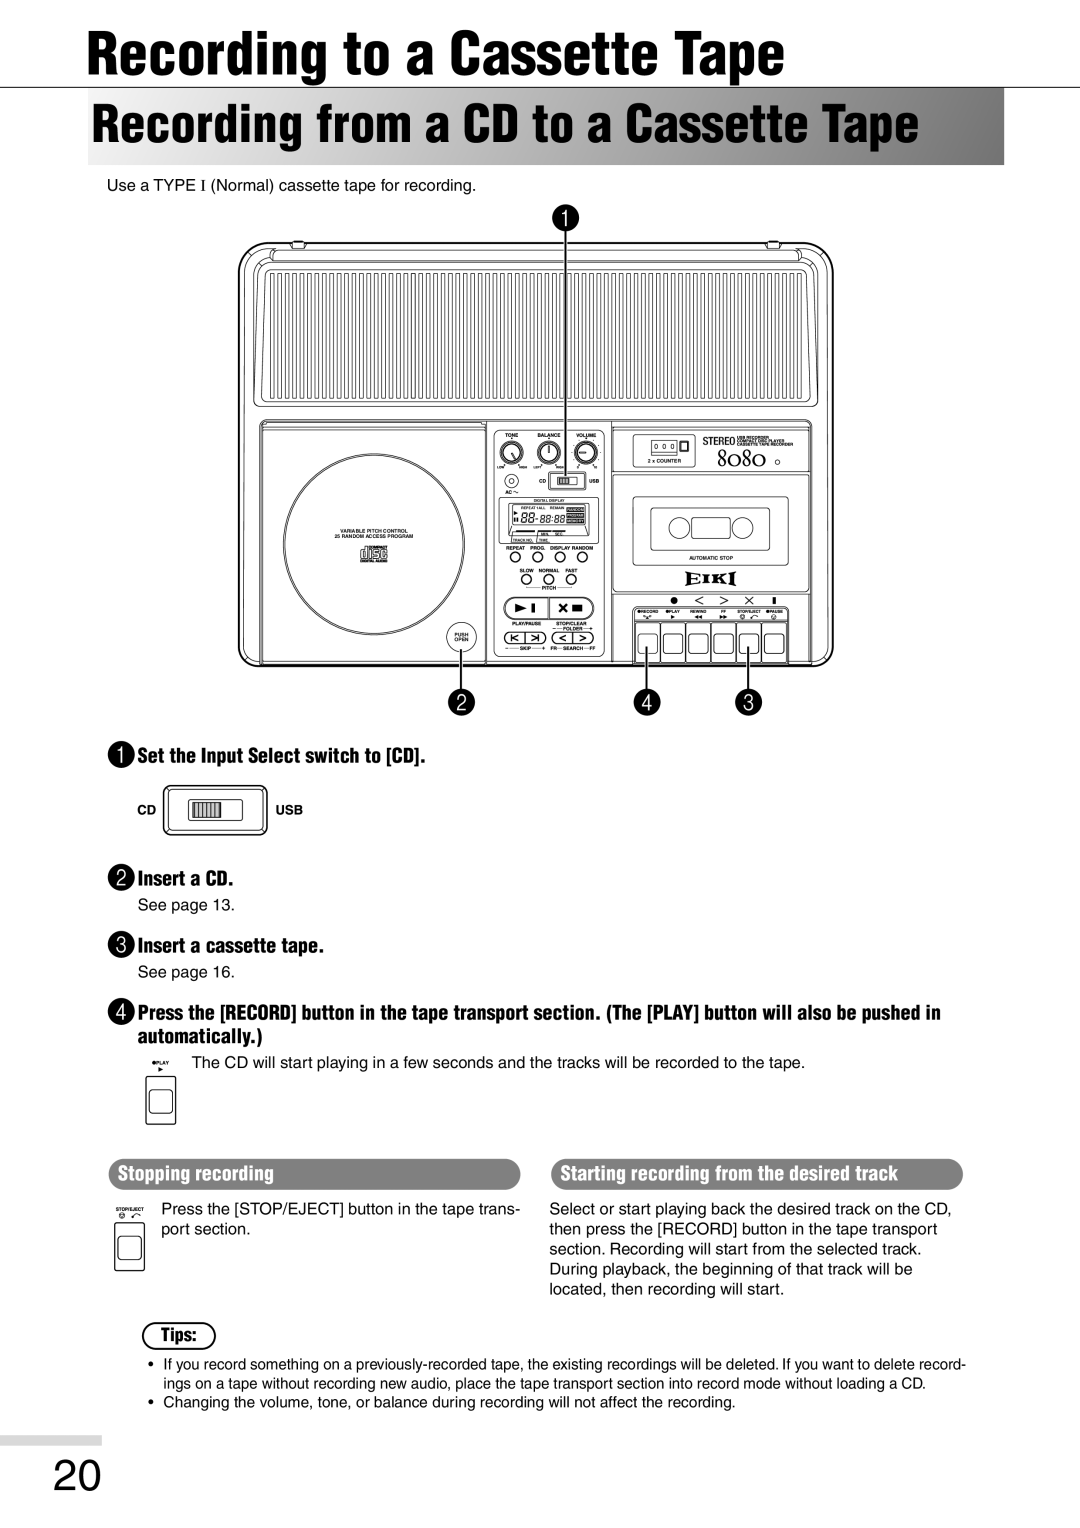 Eiki 8080 owner manual Recording to a Cassette Tape, Recording from a CD to a Cassette Tape, 3Insert a cassette tape, Tips 